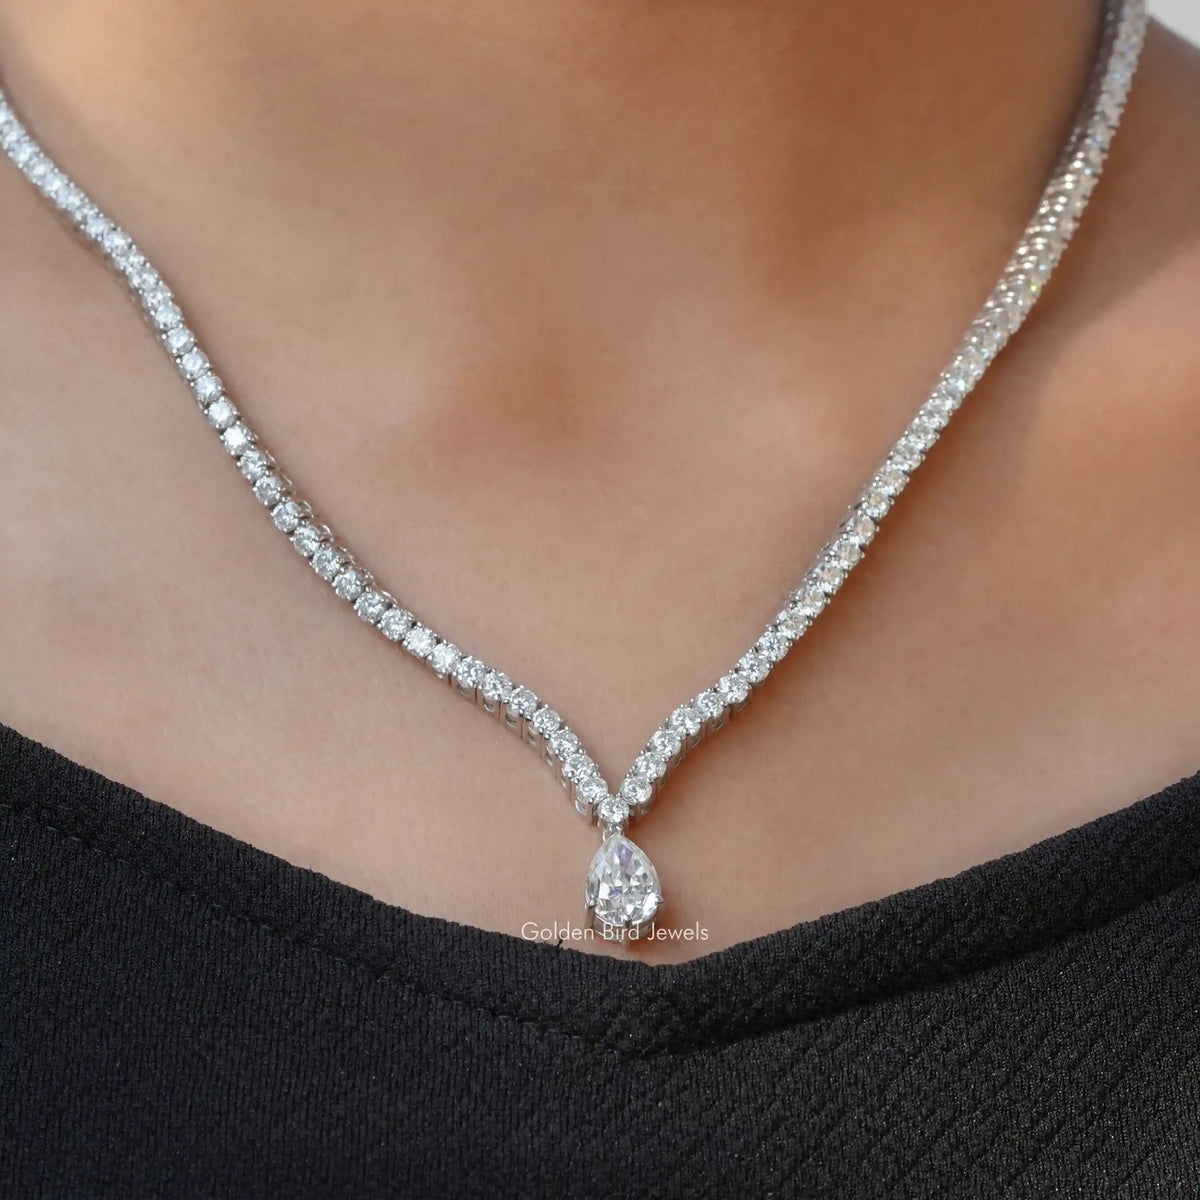 [In neck front view of pear shaped tennis wedding necklace]-[Golden Bird Jewels]